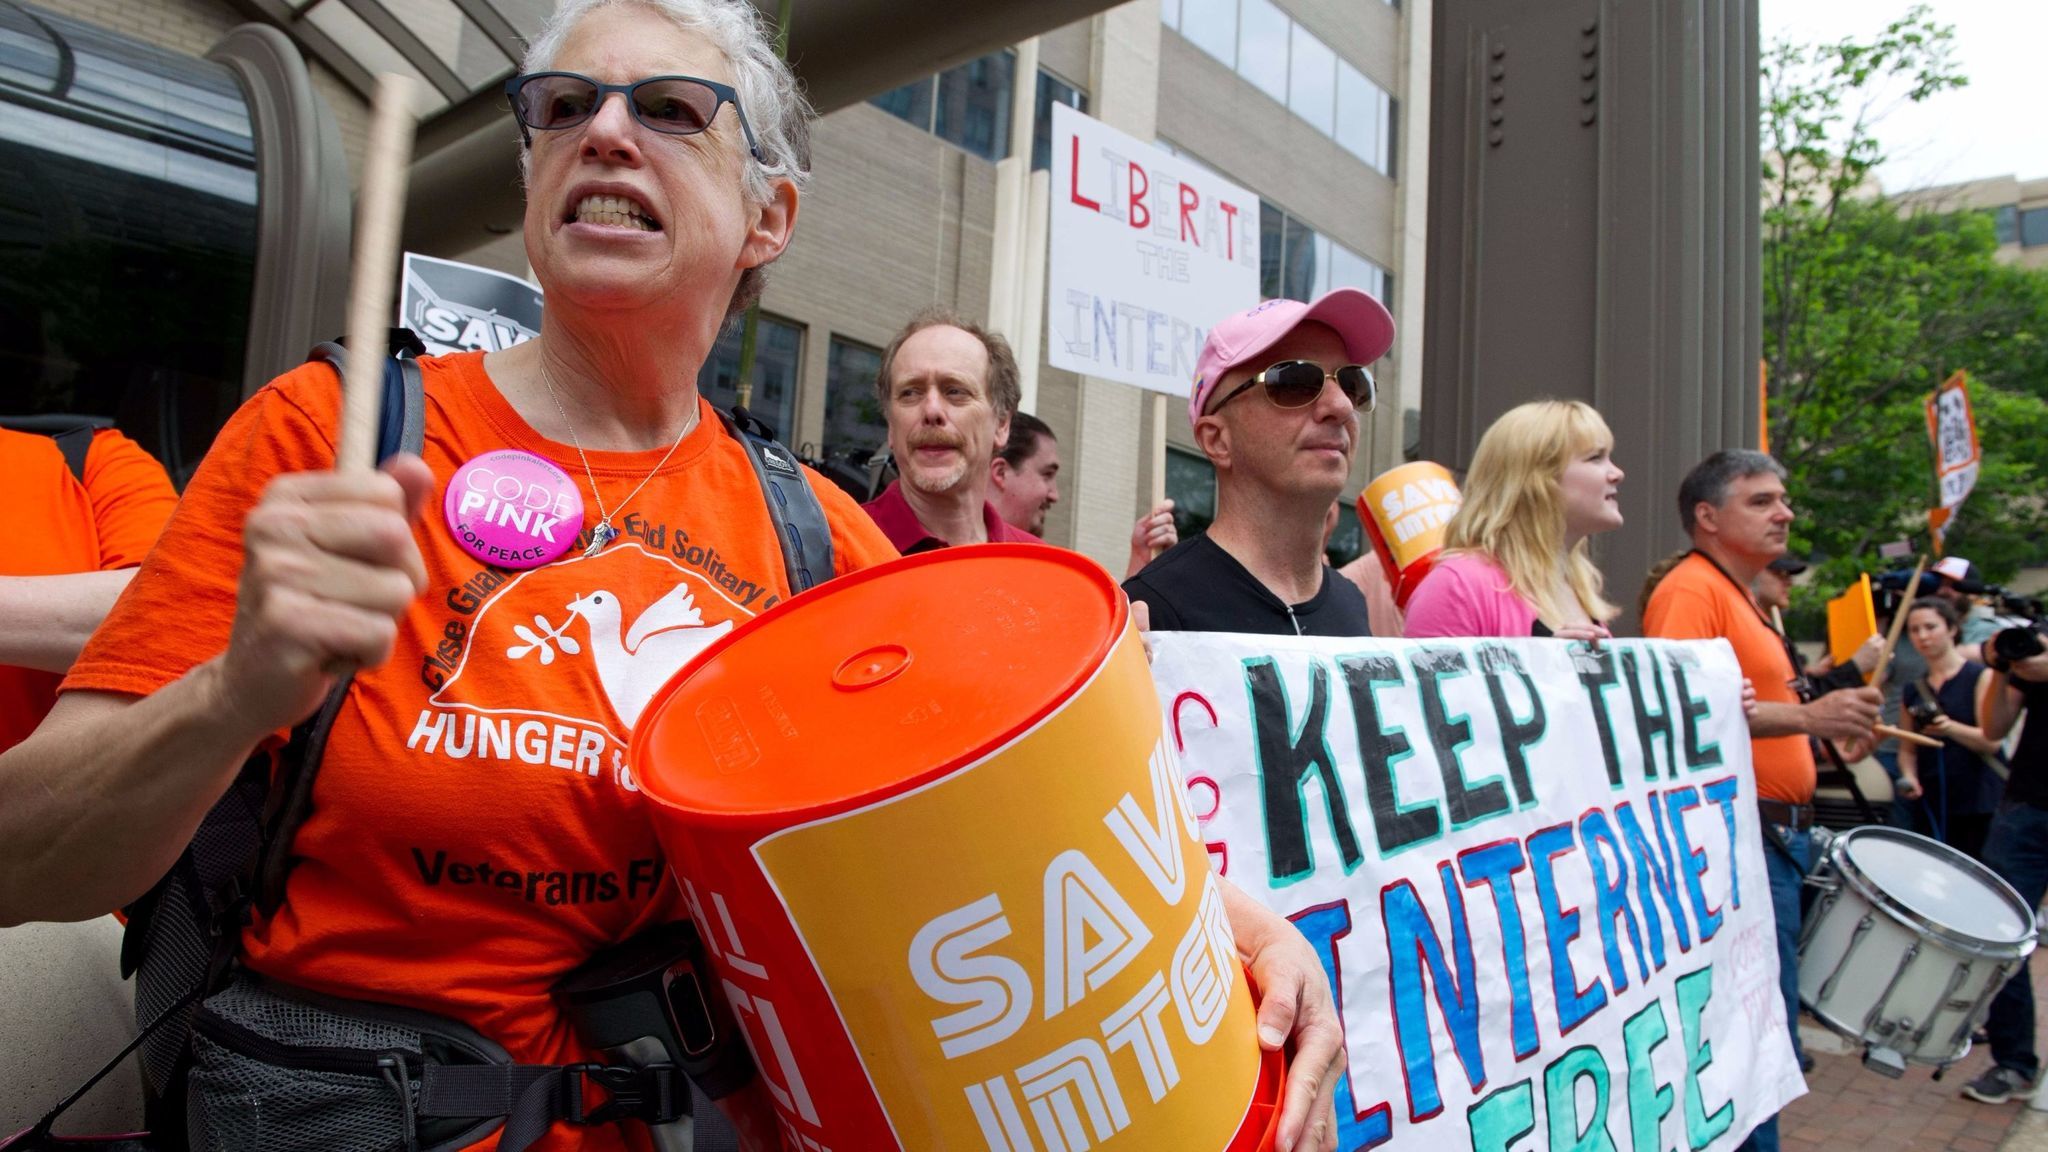 Protesters hold a rally to support net neutrality outside the Federal Communications Commission's headquarters in Washington, D.C., on May 15, 2014.